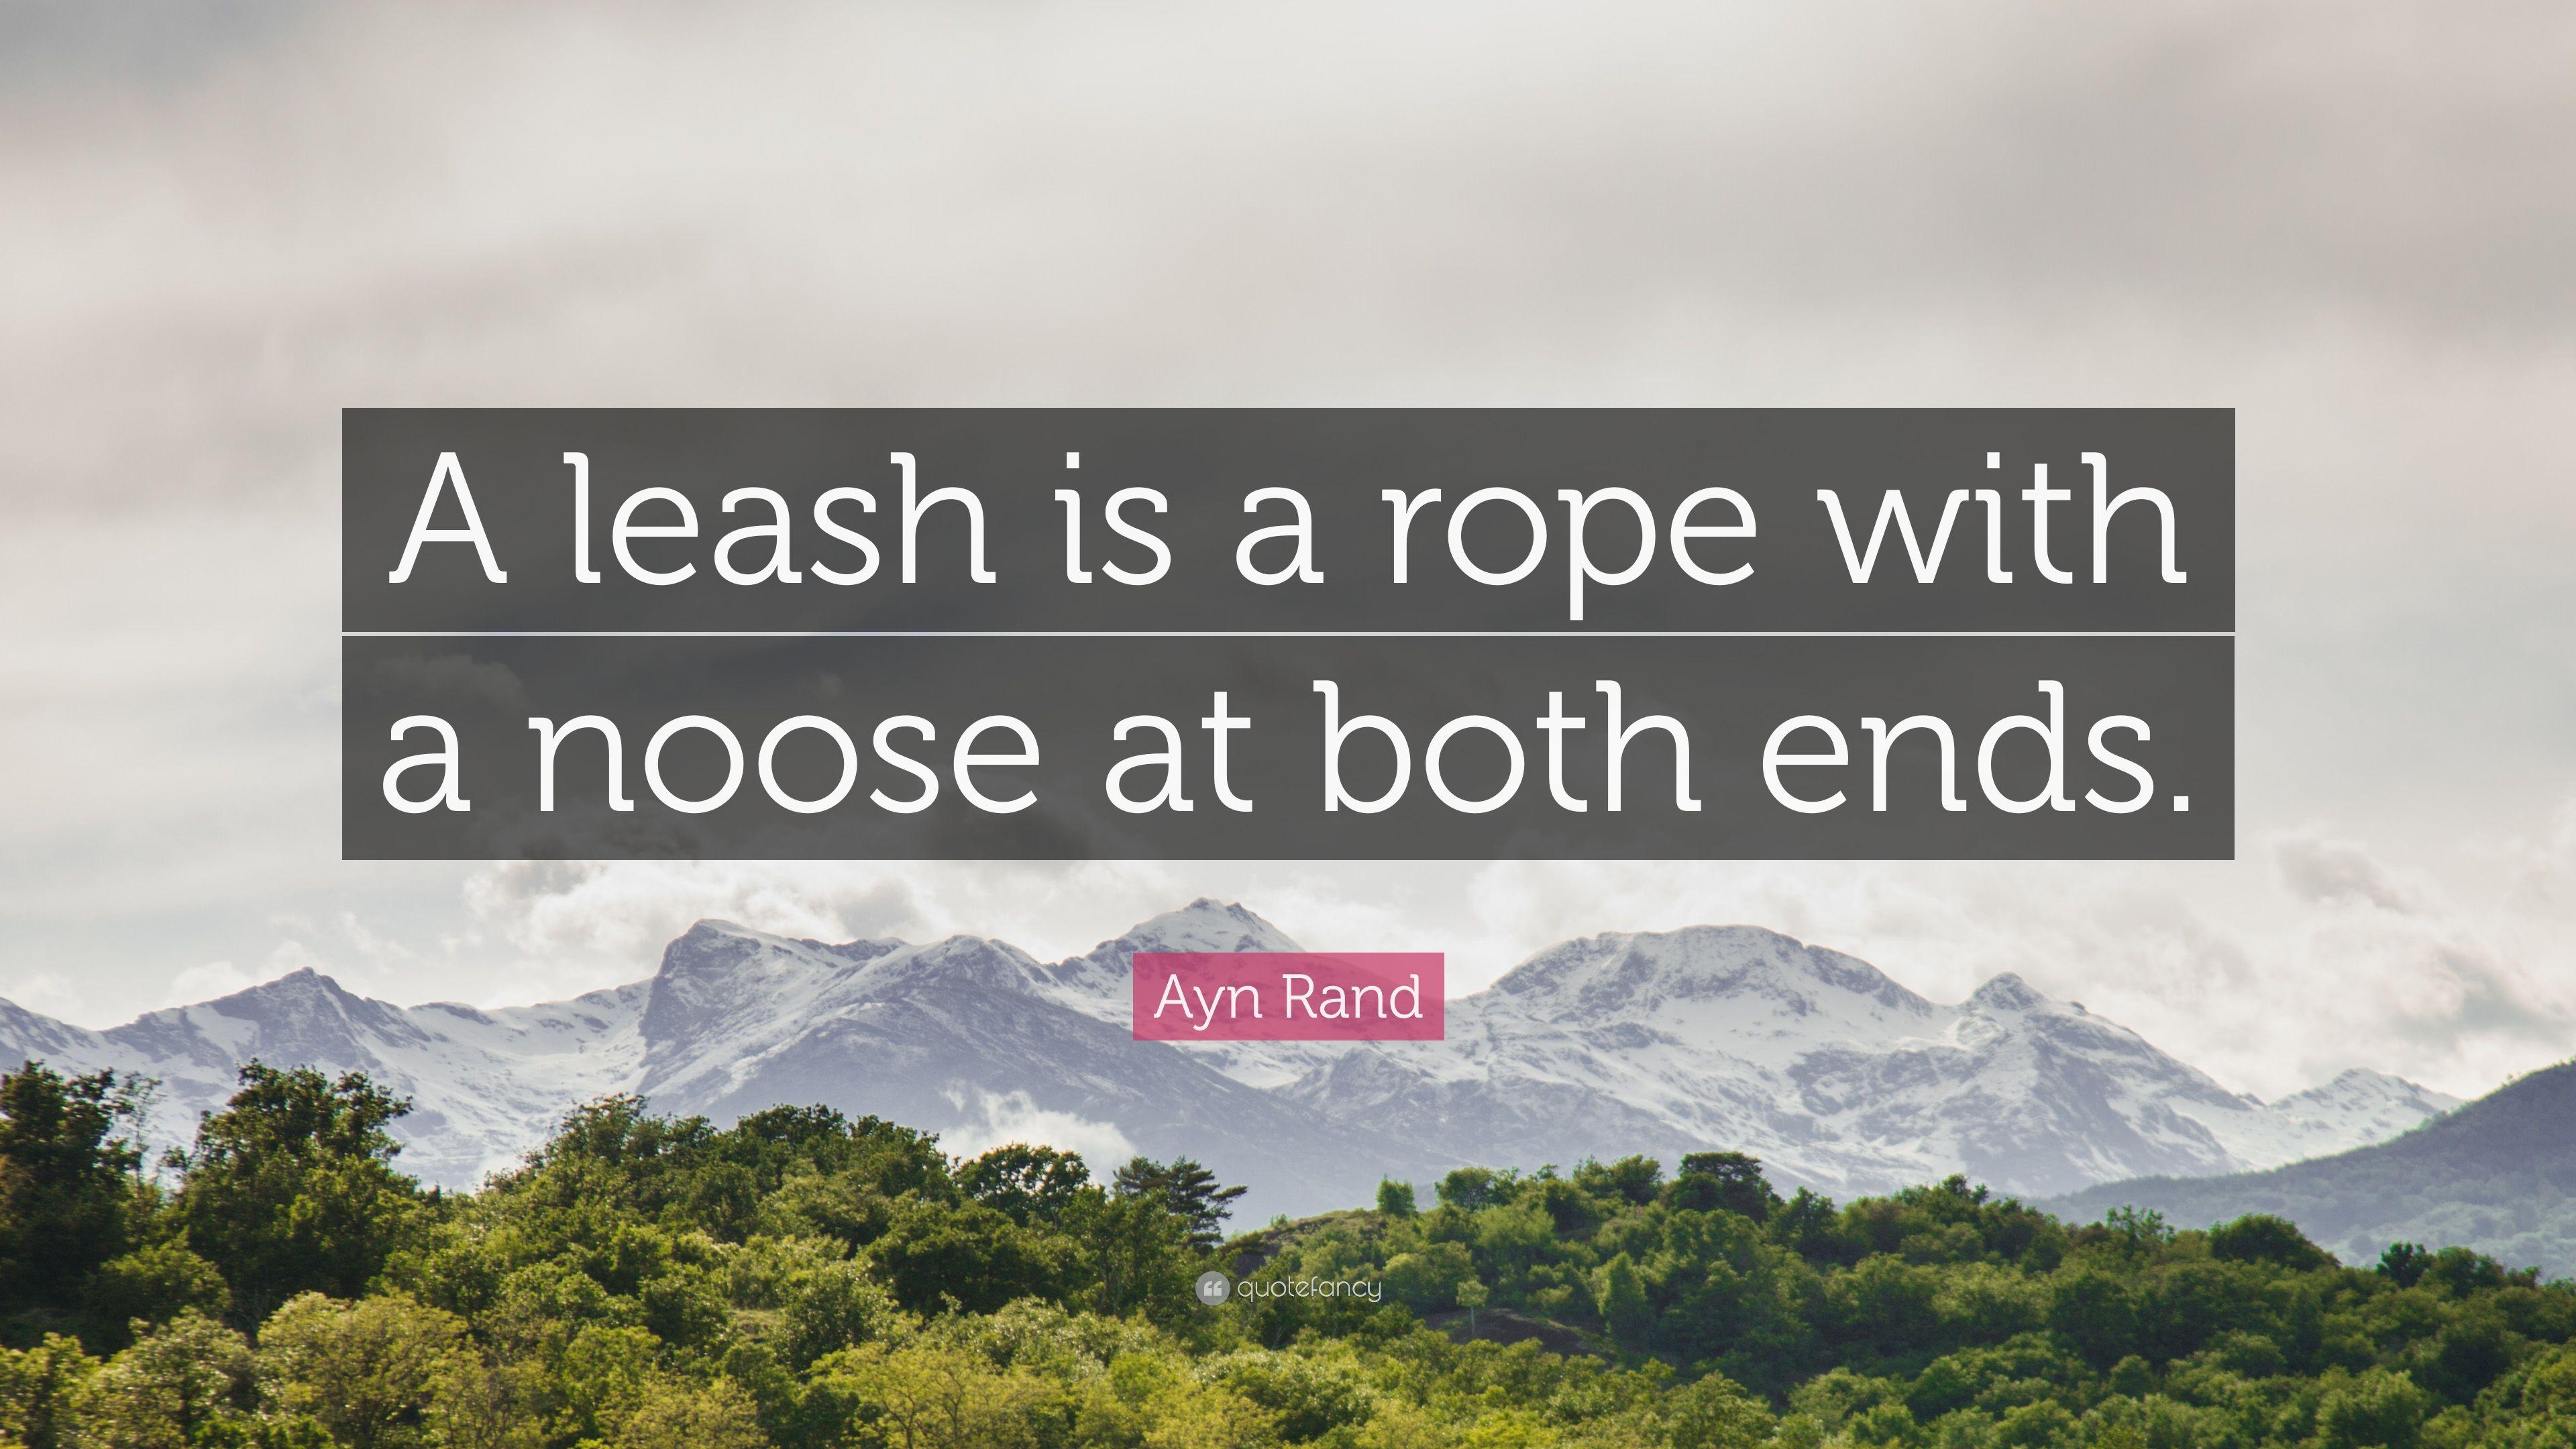 Ayn Rand Quote: “A leash is a rope with a noose at both ends.” 5